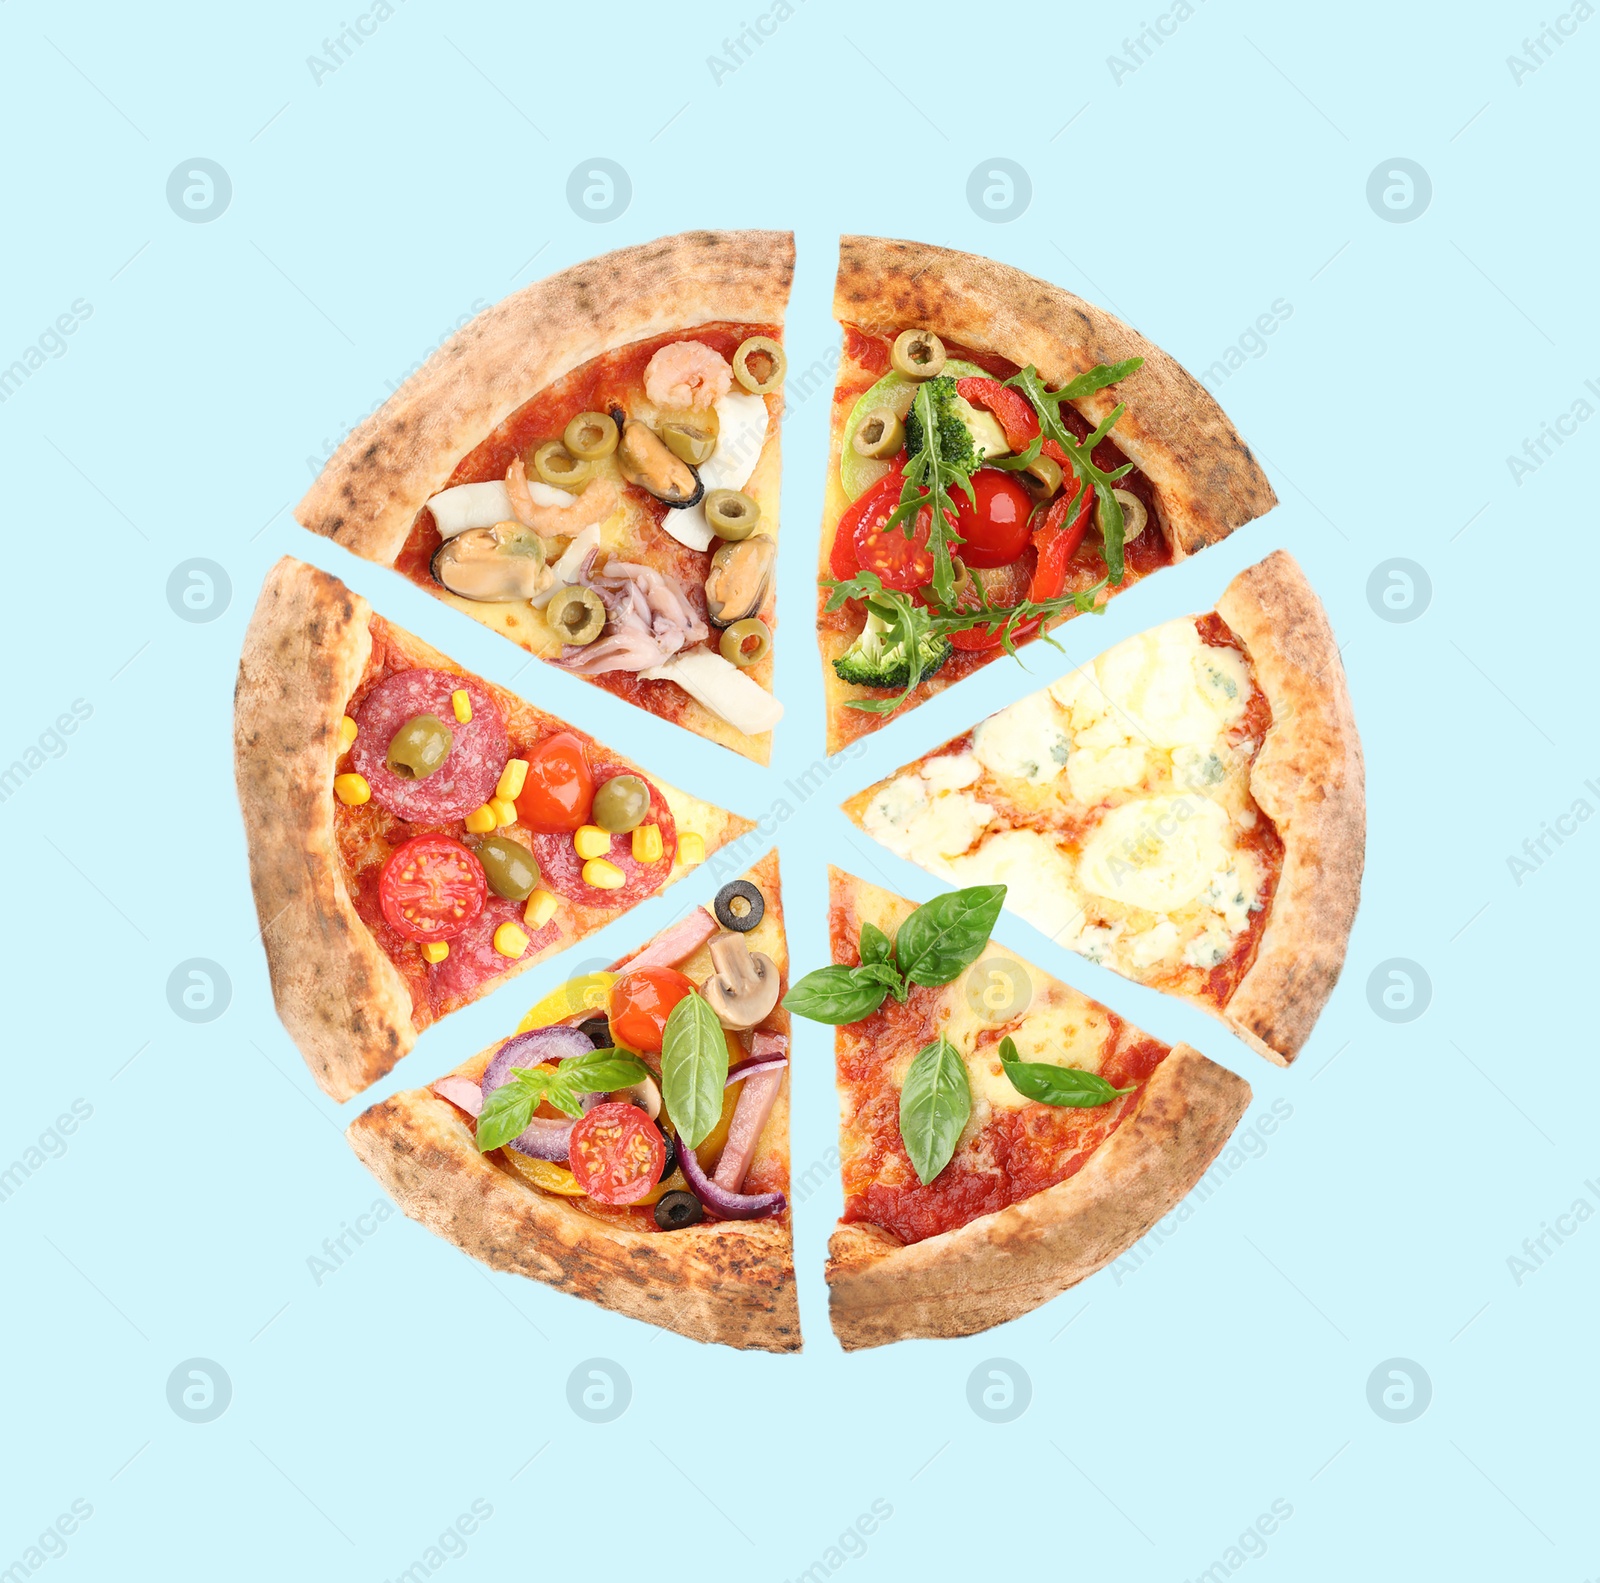 Image of Slices of different pizzas on light blue background, top view 